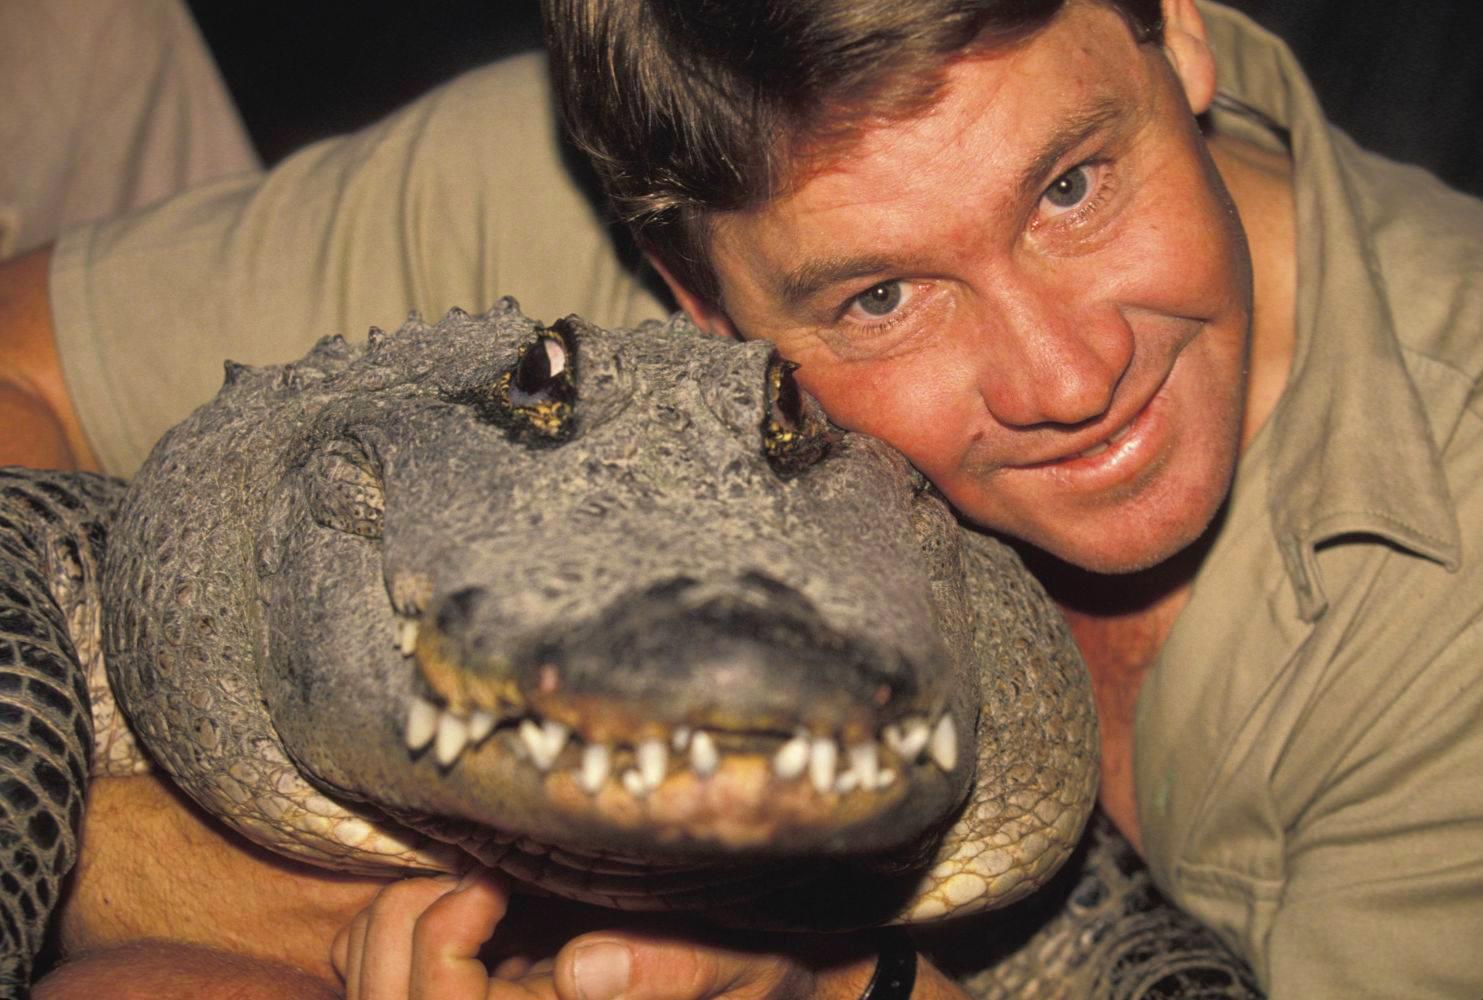 Happy Birthday to Steve Irwin from all of us at DoYouRemember.
Gone but never forgotten!  